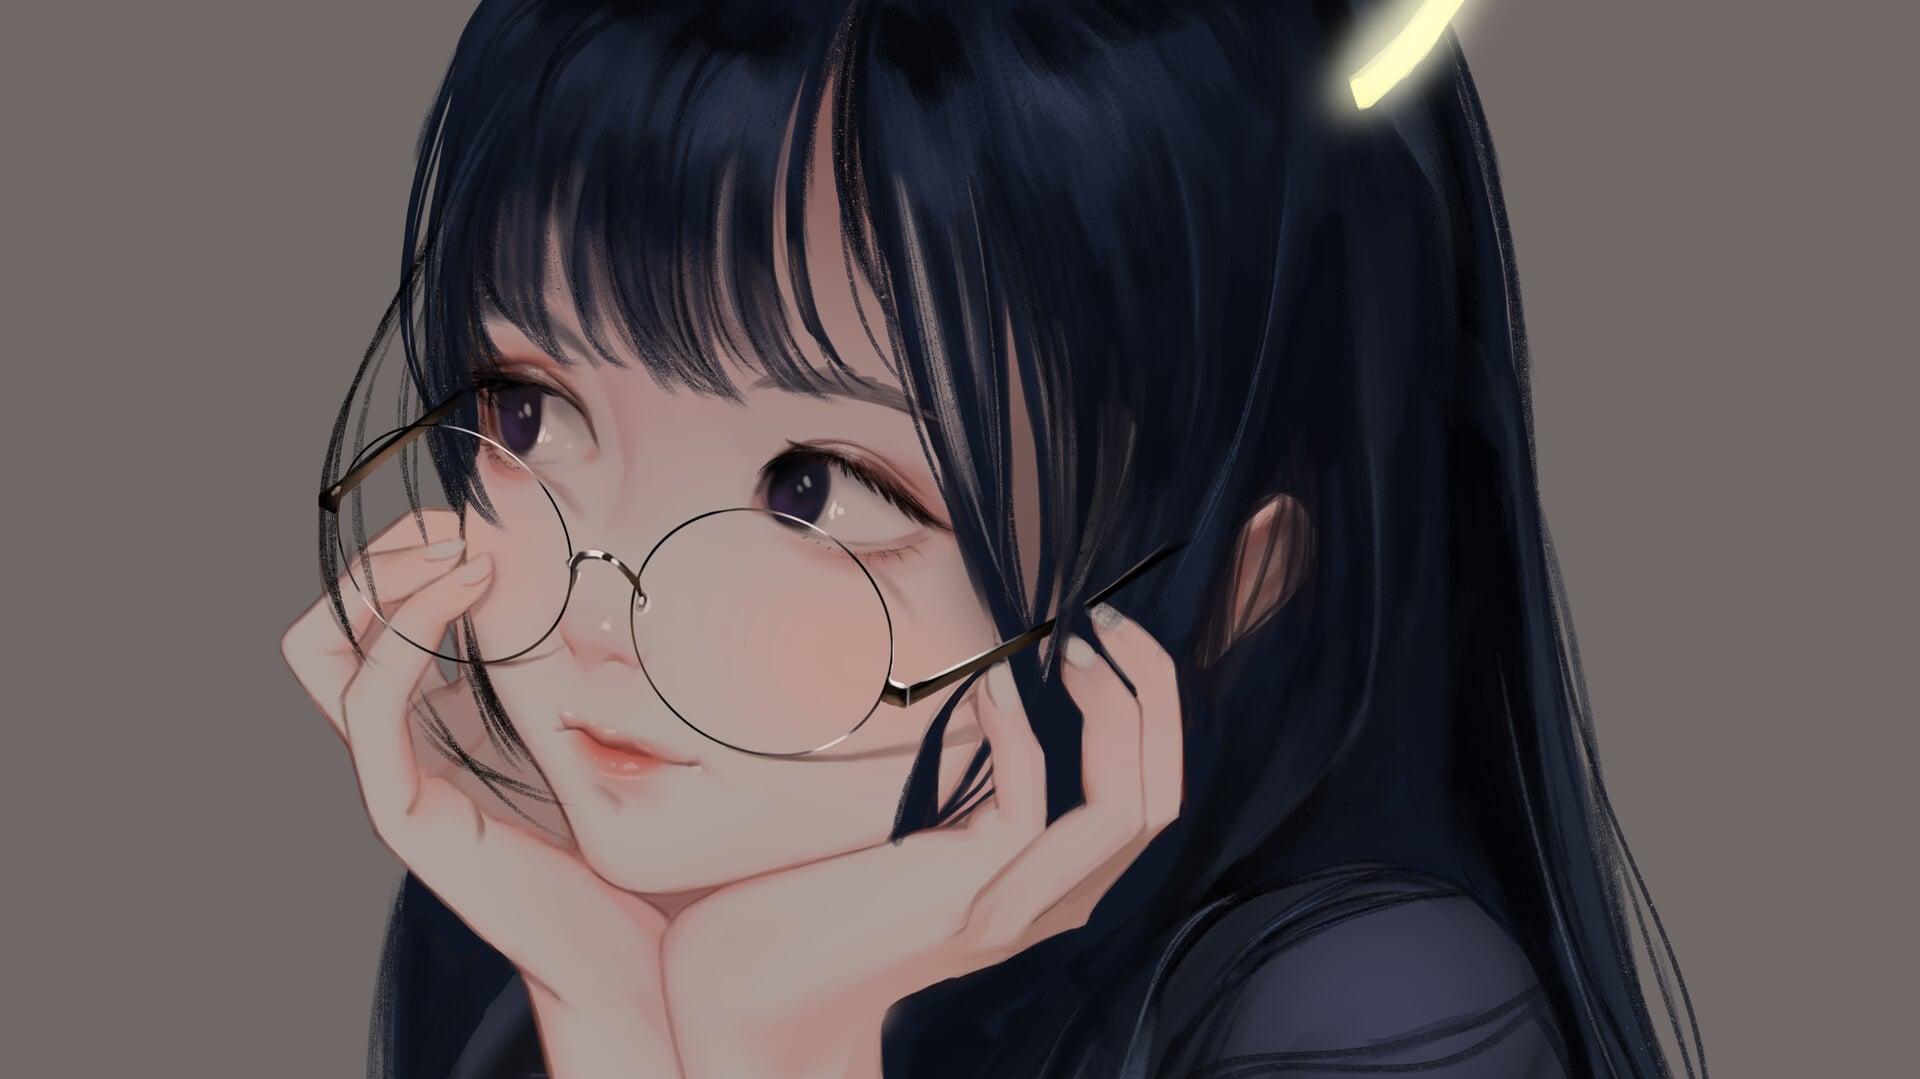 Cute Anime Girl With Glasses R Wallpaper